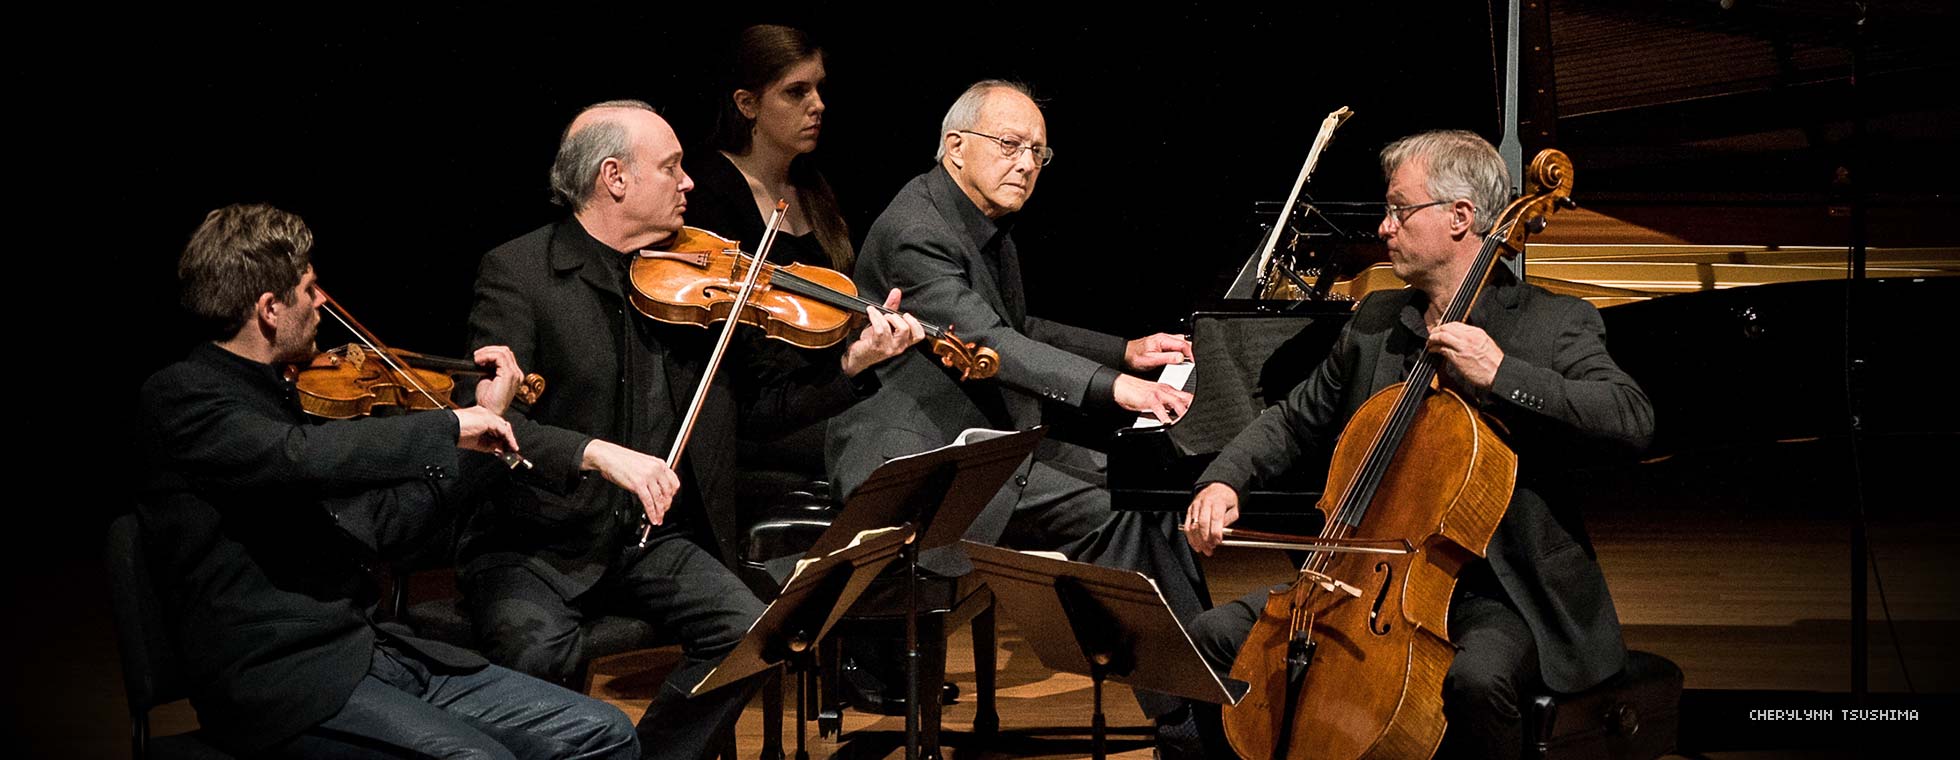 Various formally dressed string musicians are seated around a pianist who performs while he looks away from his instrument.